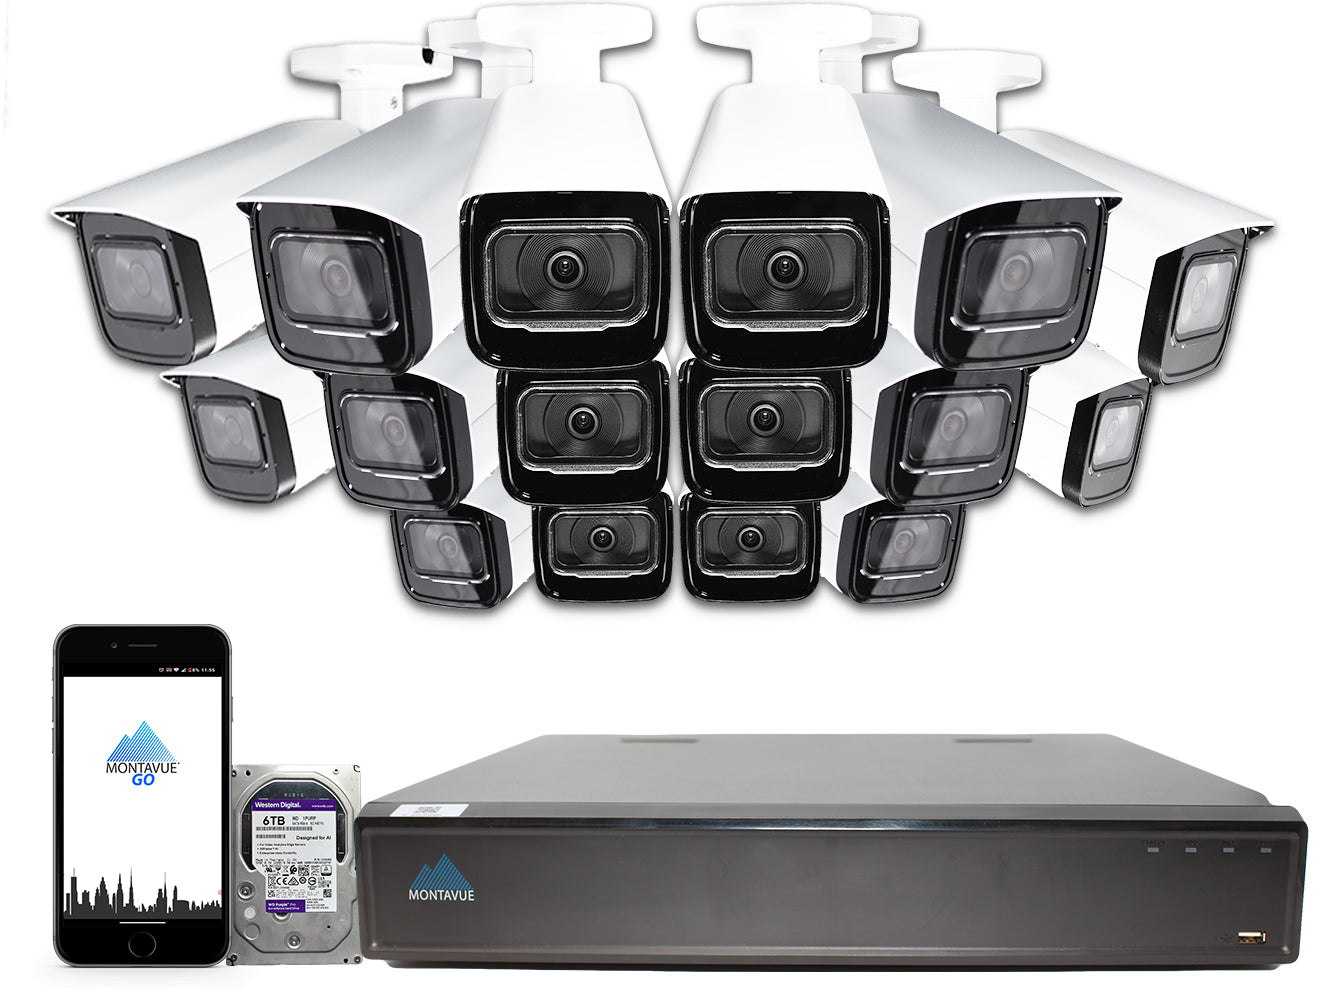 MTB8110 Package | 4K Acupick Bullet Cameras and 32 Channel 5 Series AI NVR with 6TB HDD - Montavue